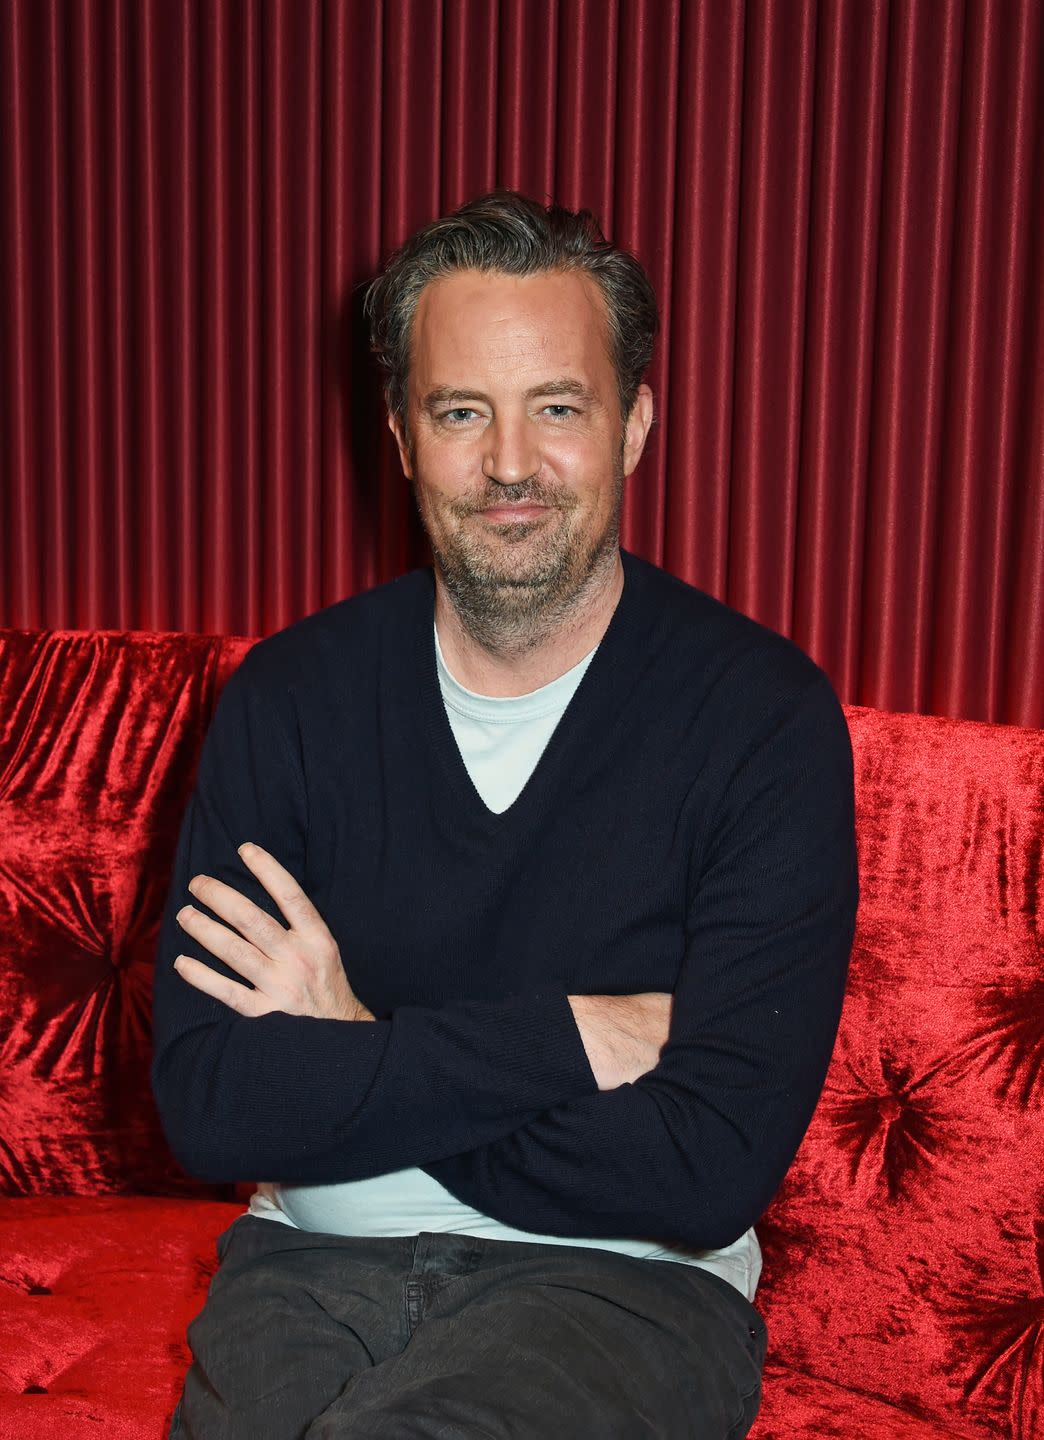 matthew perry sits with his arms folded against a red sofa with a matching red curtain behind him